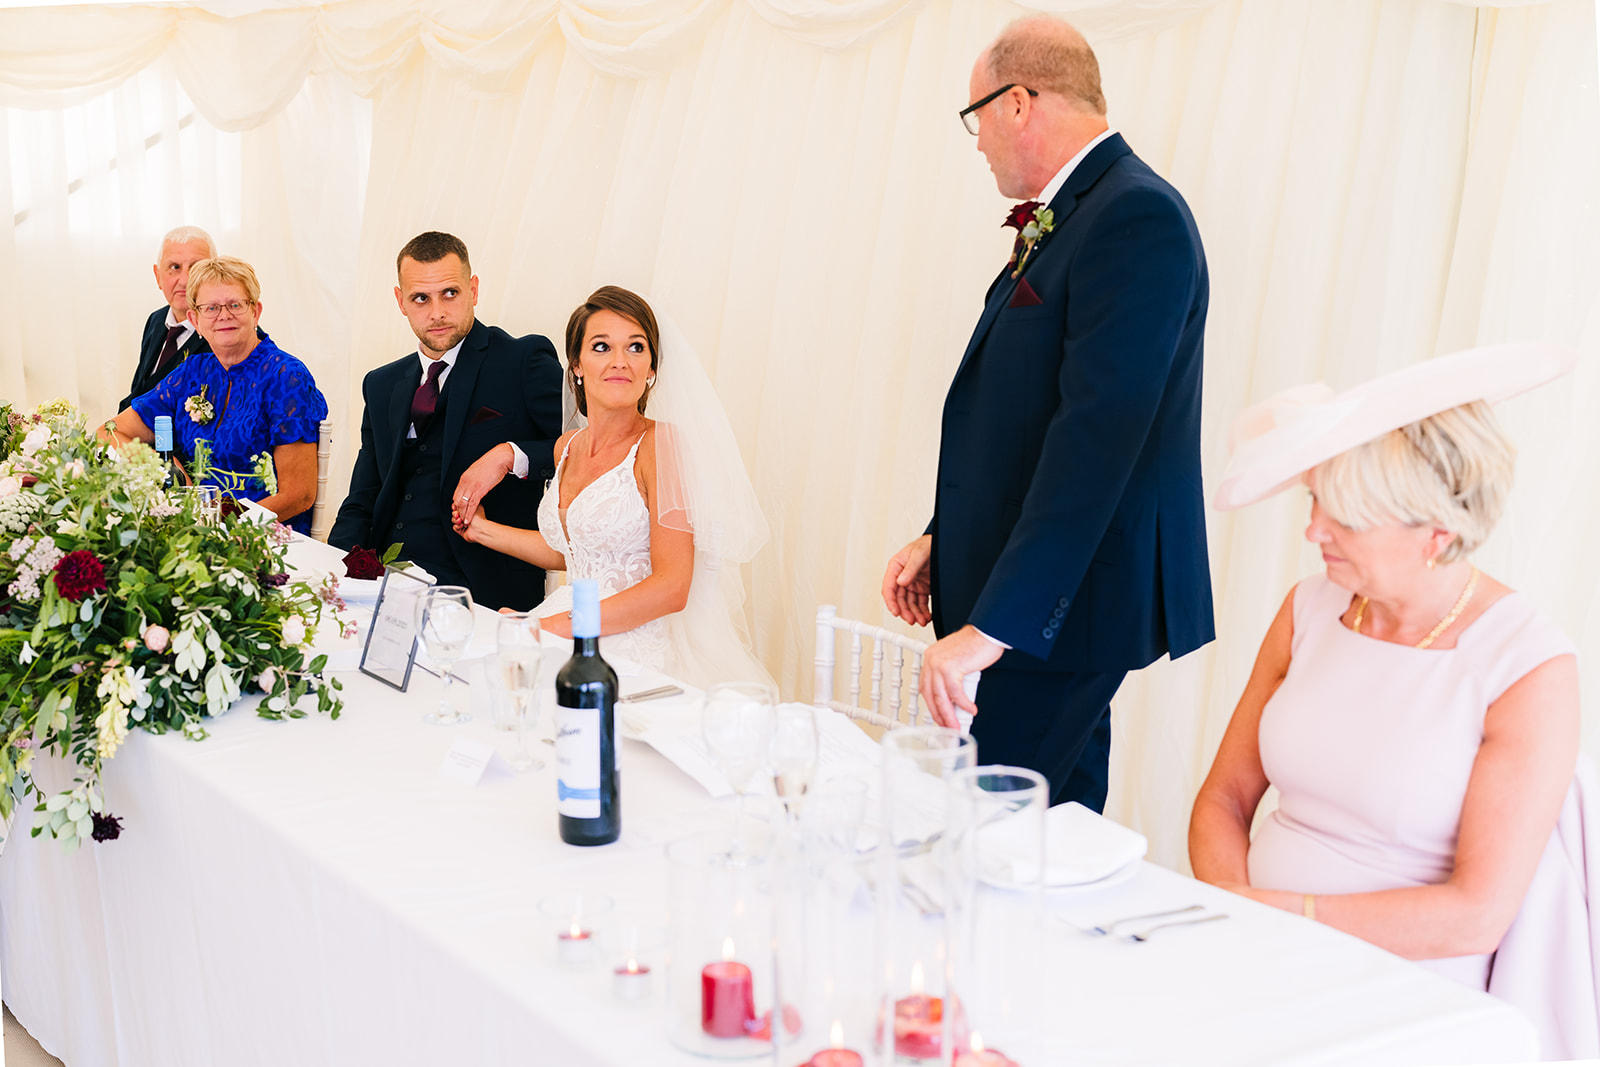 Bride and groom react to the father of the bride wedding speech

